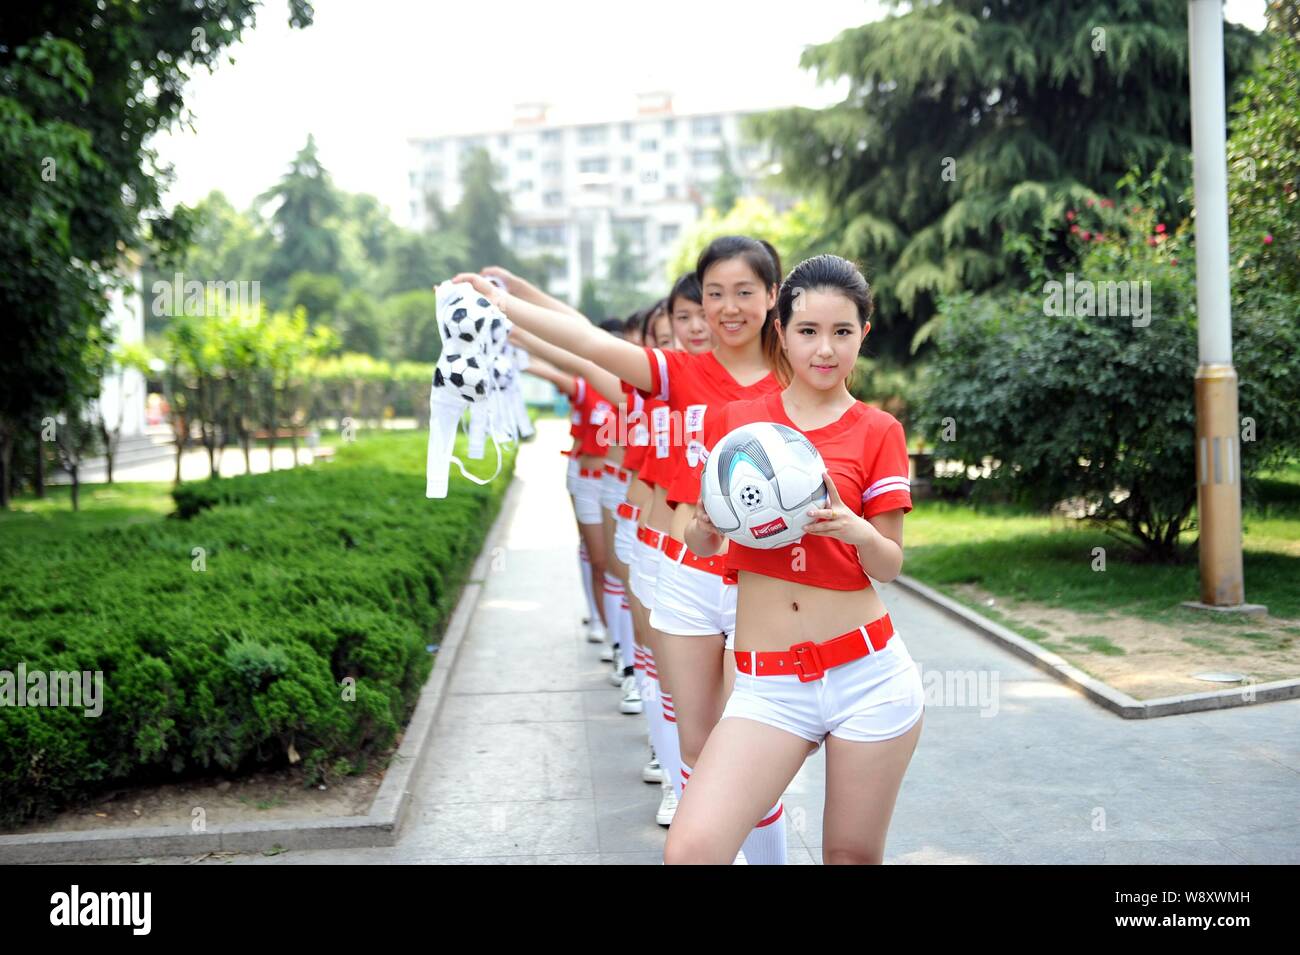 Young women hold their football-patterned bras to protest being